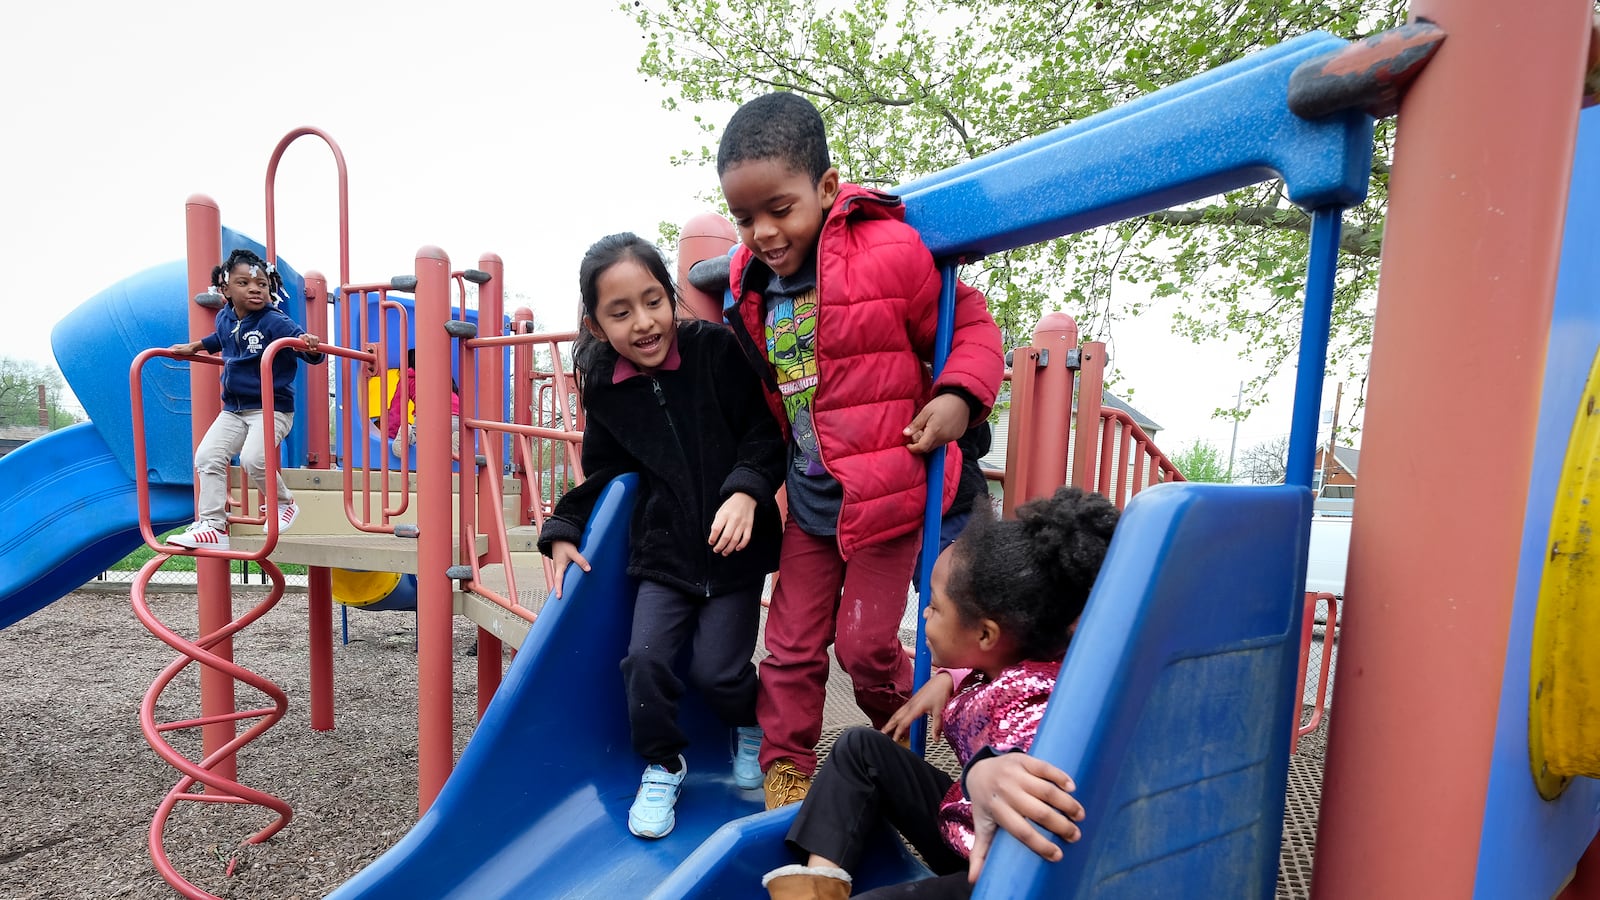 Students play on the playground at Thomas Gregg Neighborhood School, an elementary school in Indianapolis, Indiana.